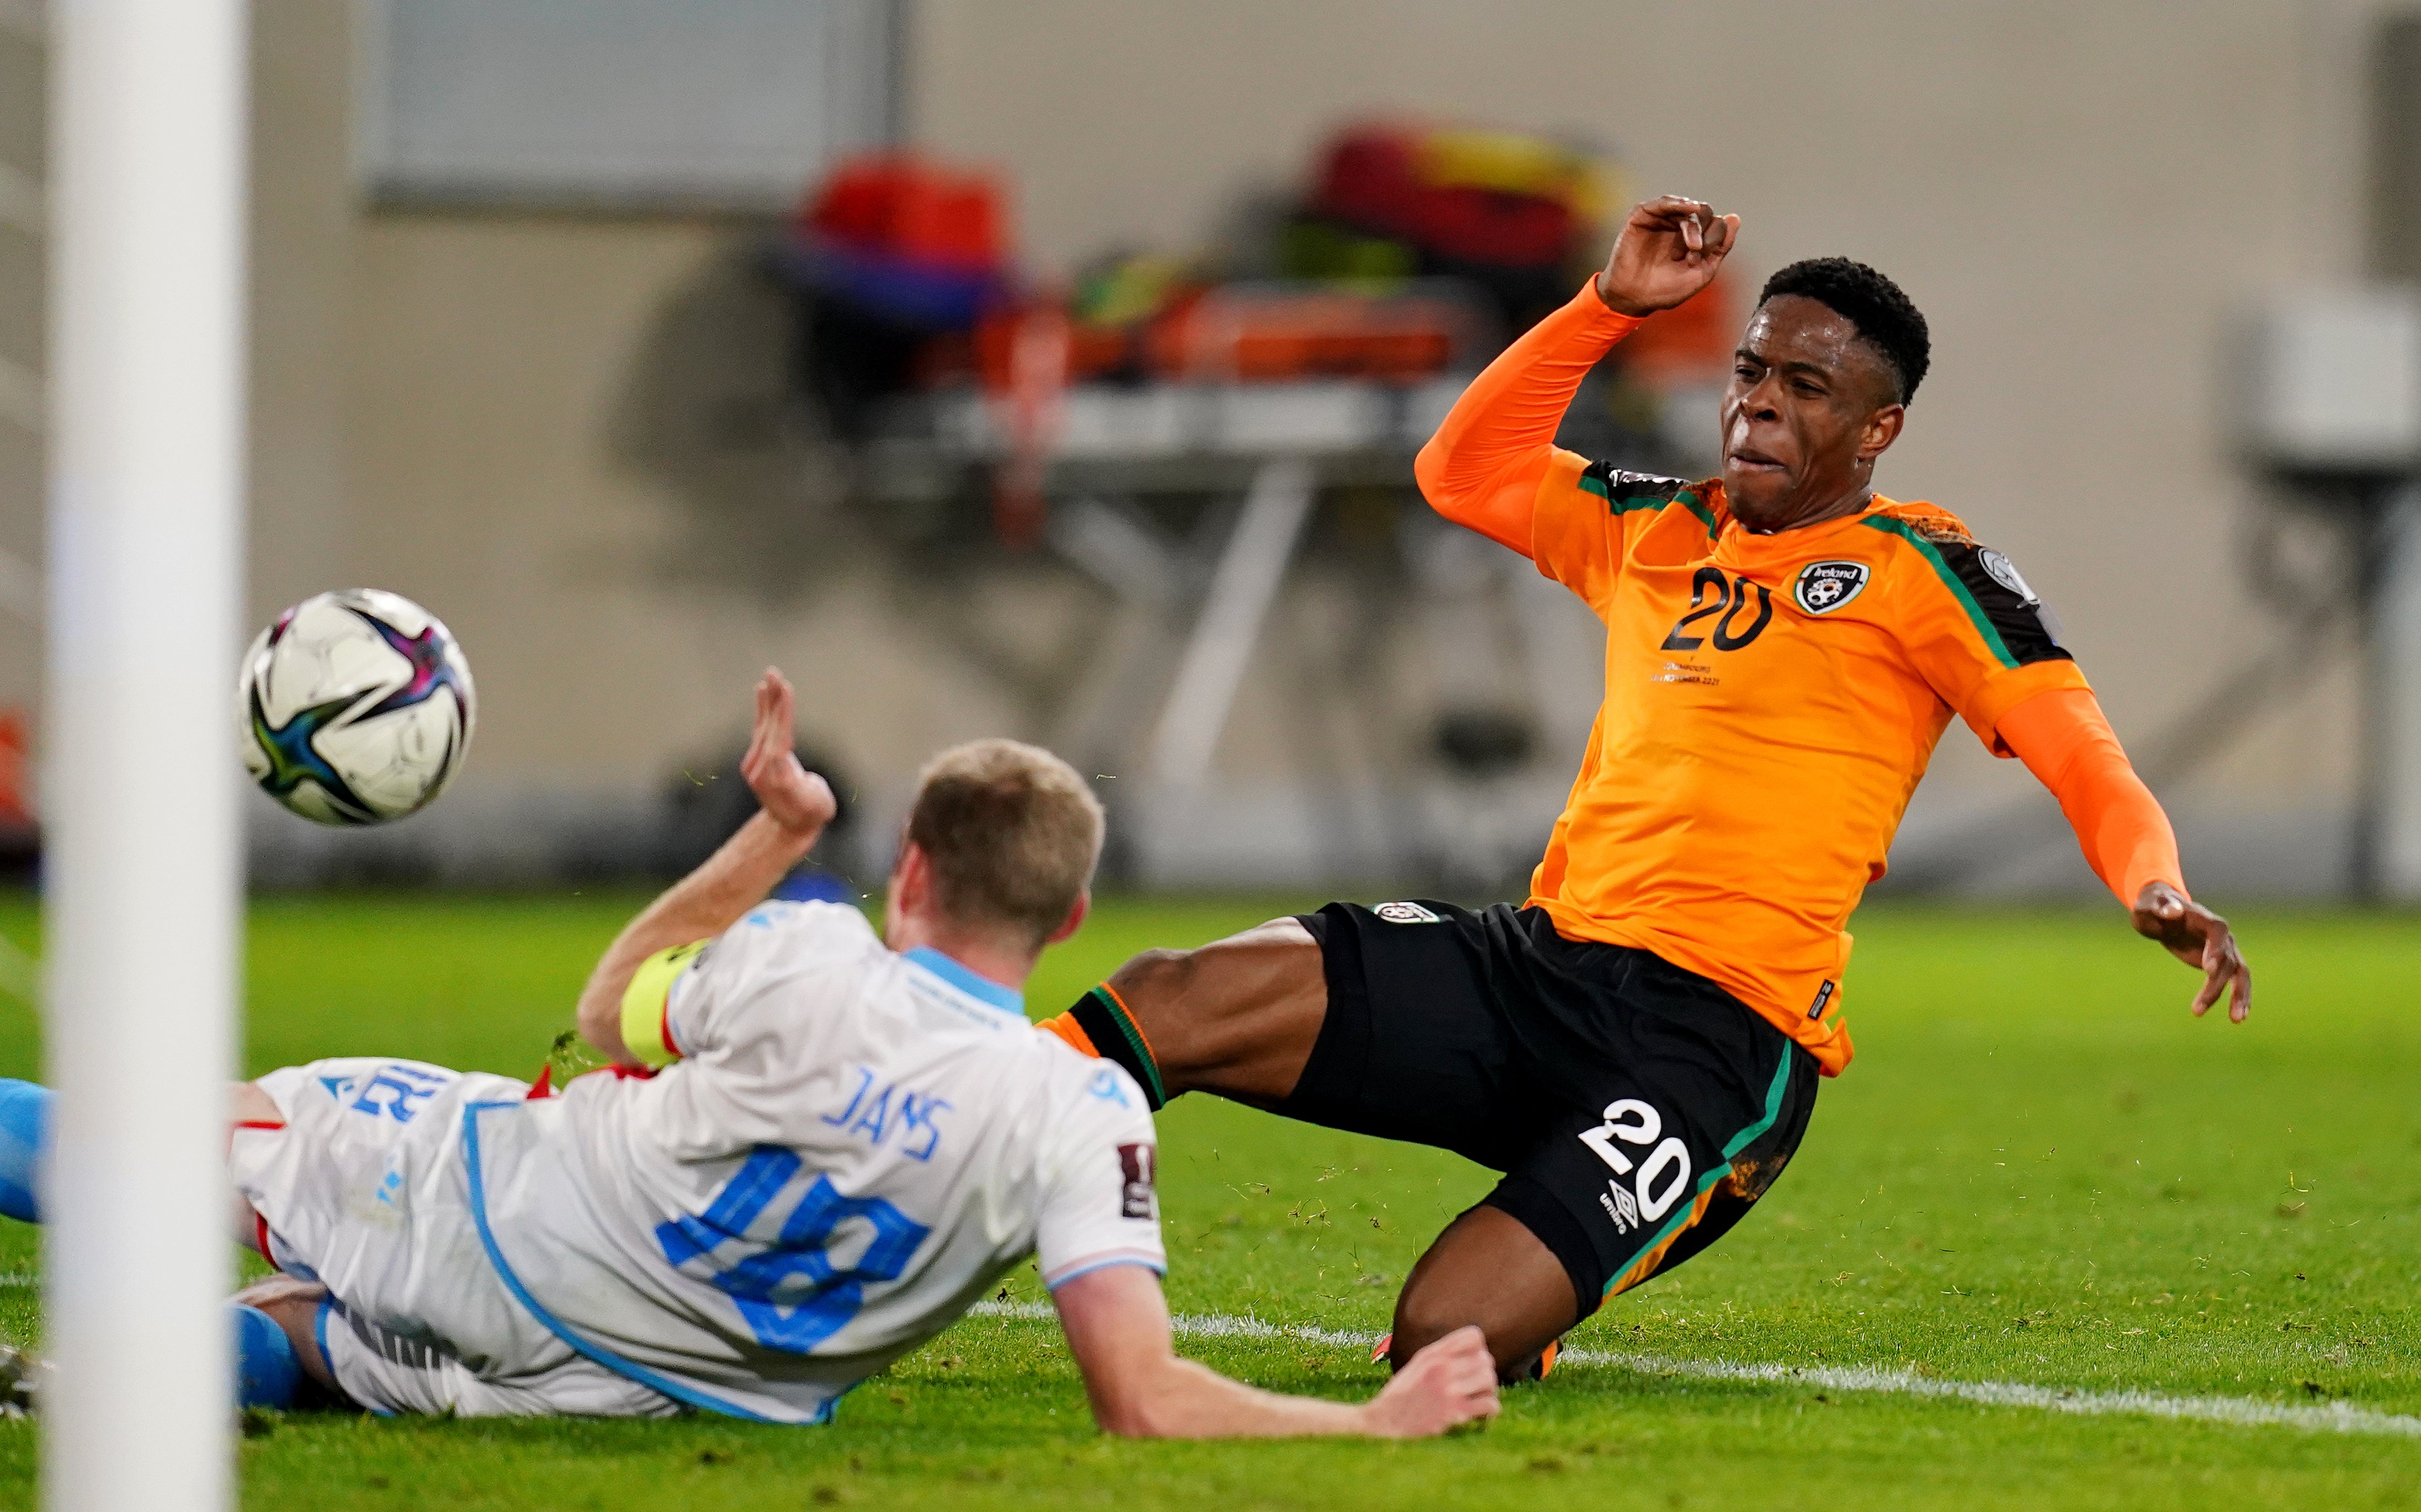 Chiedozie Ogbene scored Ireland’s second goal against Luxembourg (John Walton/PA)